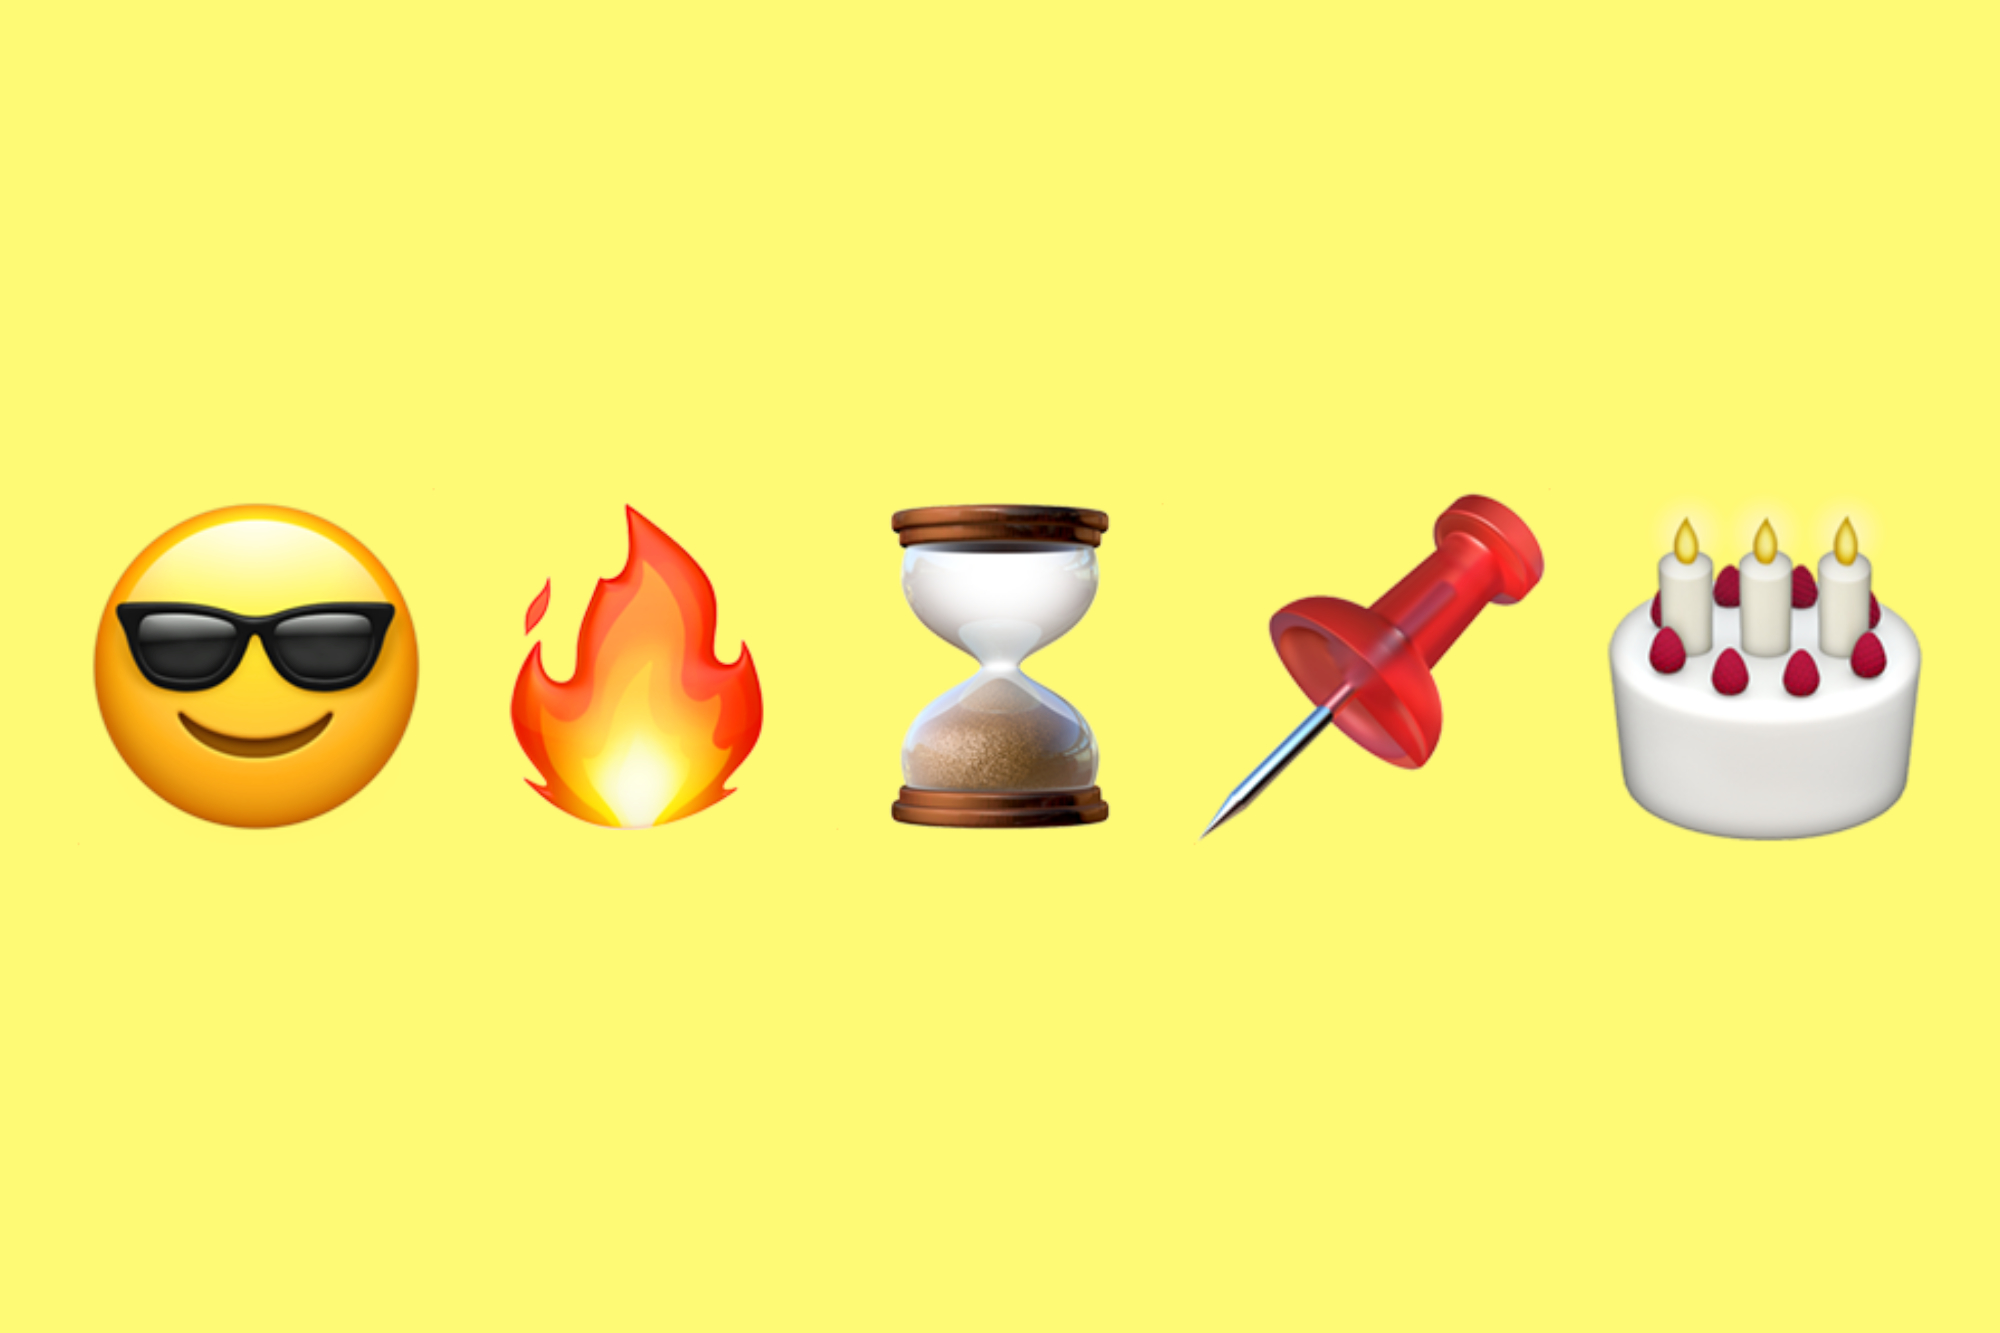 Snapchat emojis, including a sunglasses face, fire, hourglass, pin, and birthday cake.